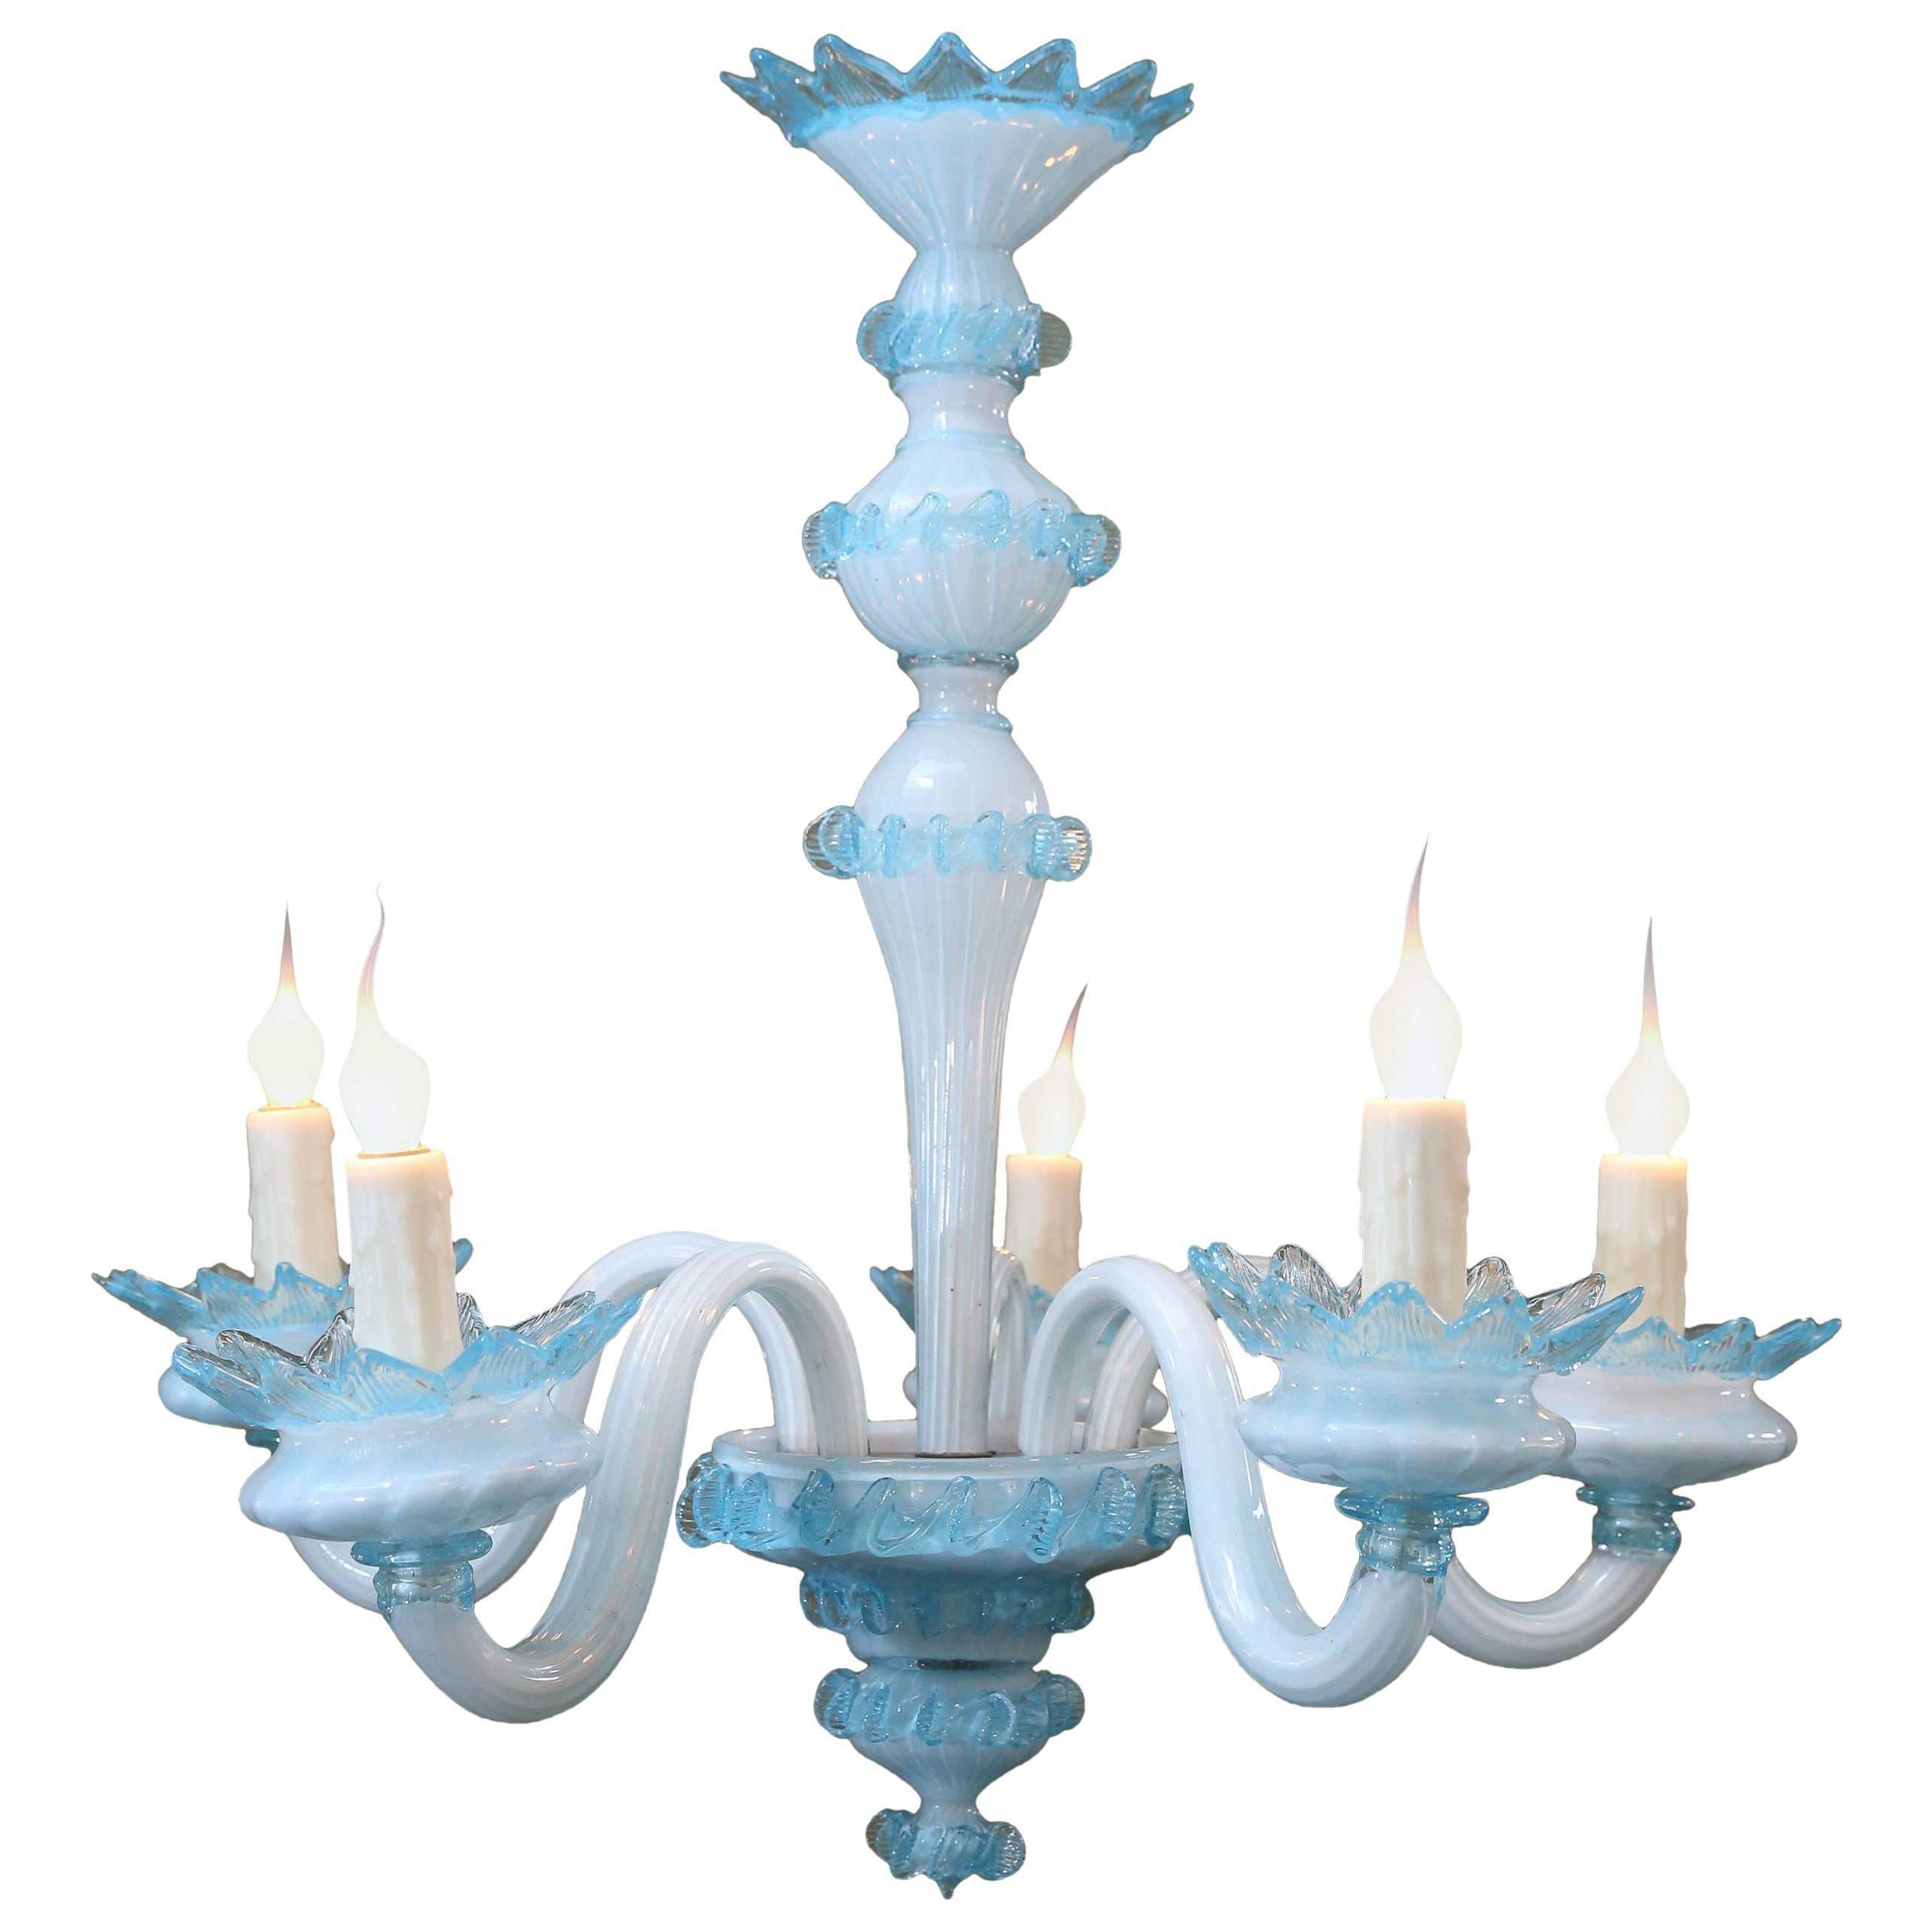 Handblown Blue Murano Glass Chandelier with Five Arms